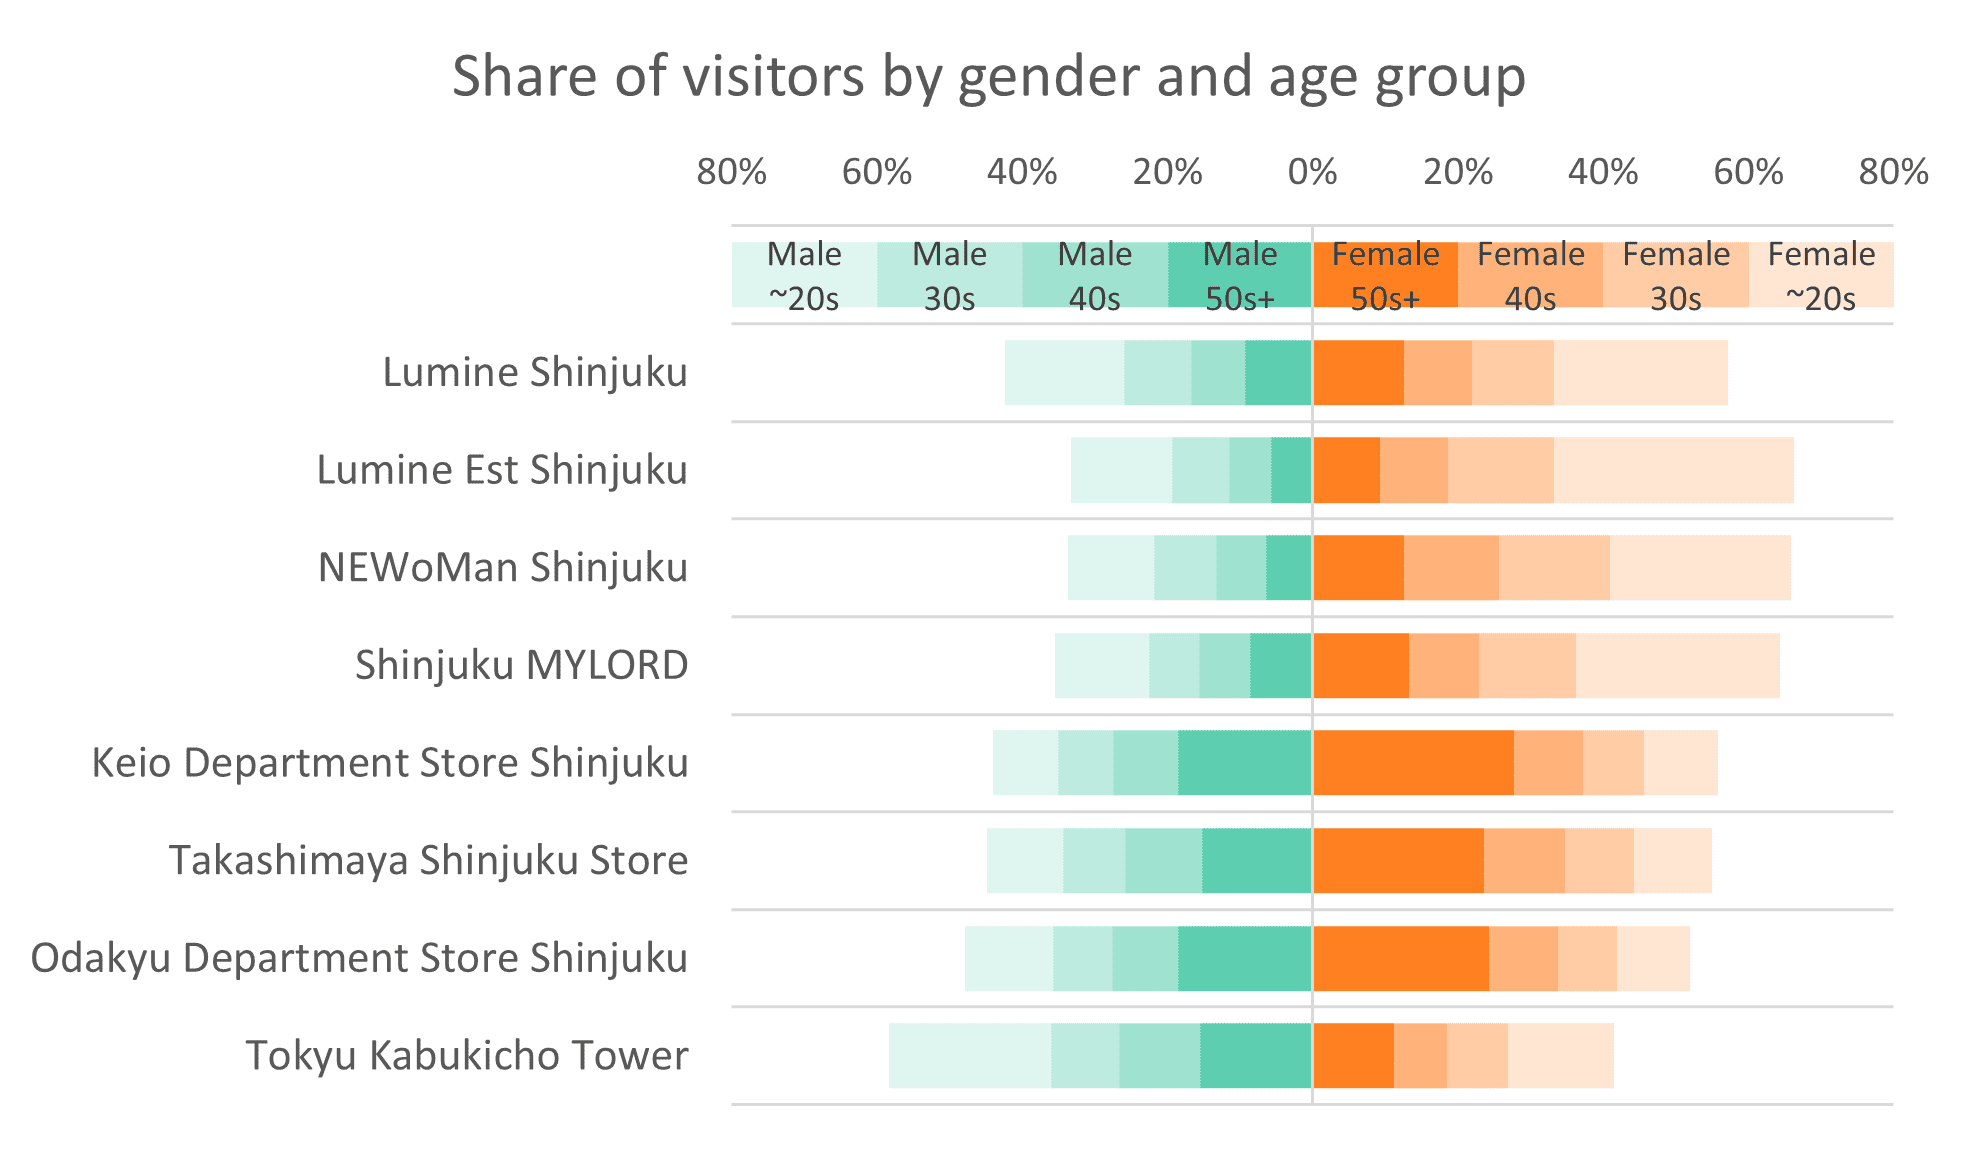 "Share of store visitors by gender and age group" shows which stores each group visited the most.